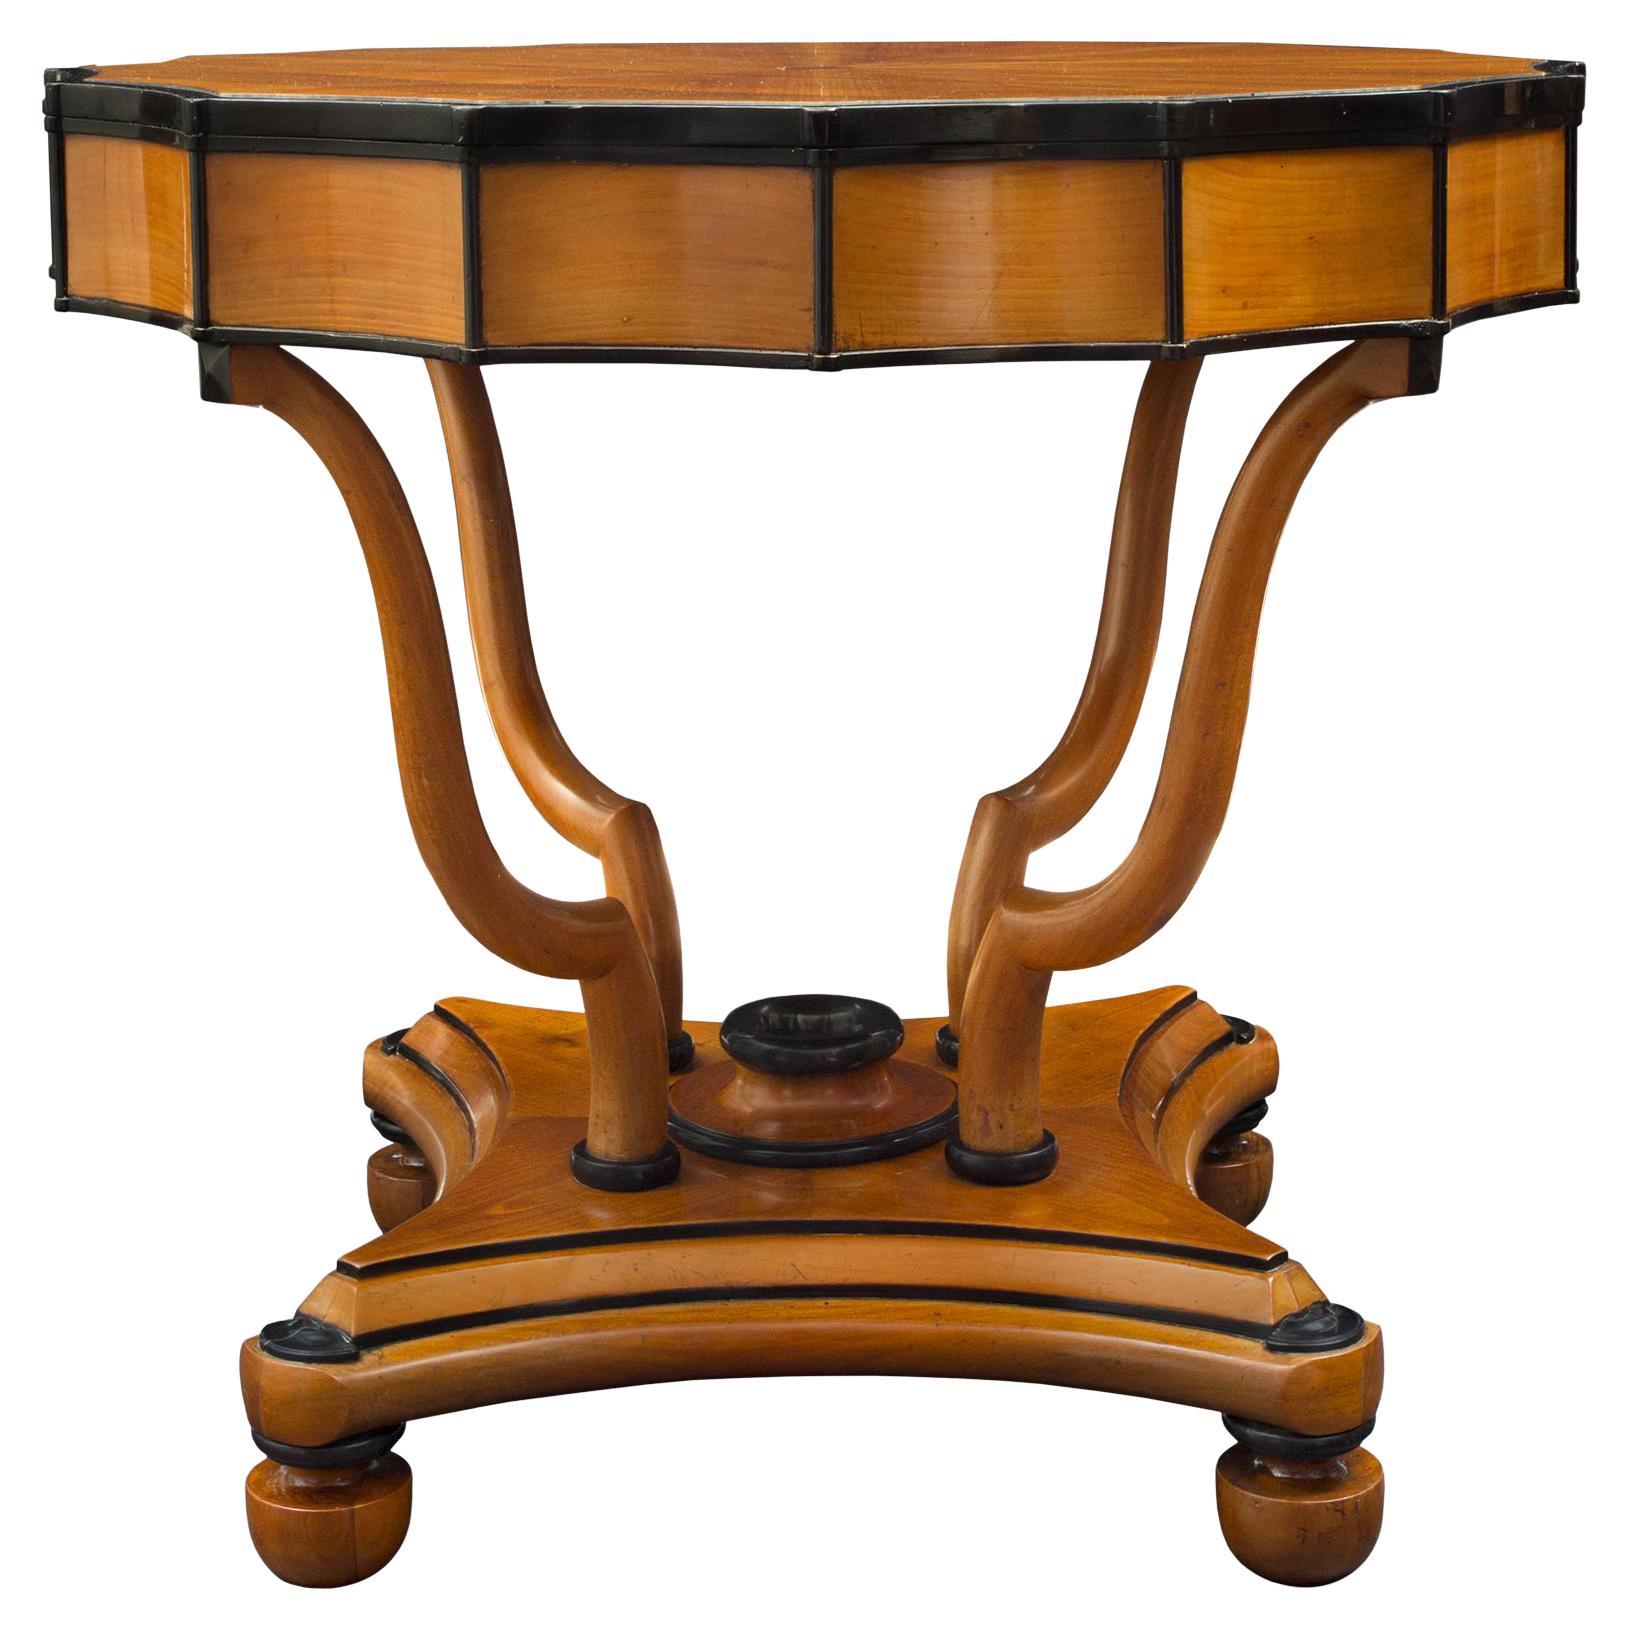 Italian Early 19th Century Neo-Classical St. Cherry and Ebony Side Table